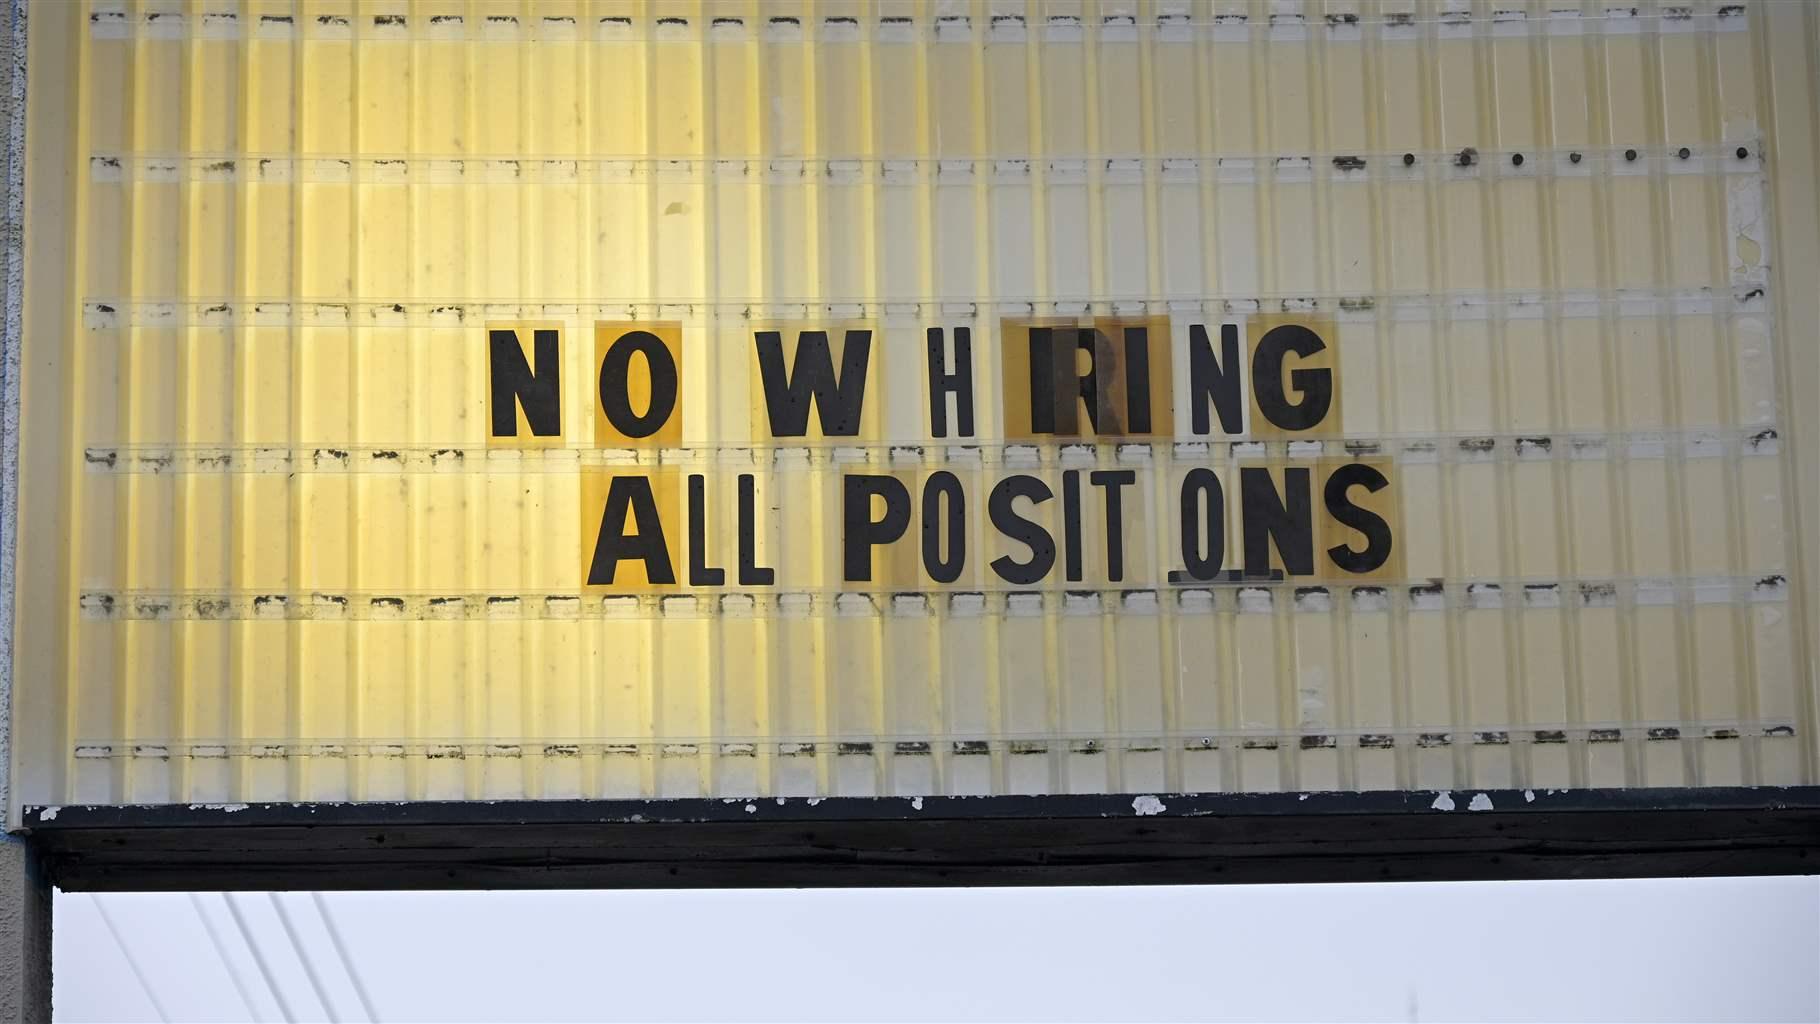 A Now Hiring sign advertising job openings is viewed outside a bowling alley during a new coronavirus pandemic, Thursday, July 29, 2021, in Winter Garden, Fla.